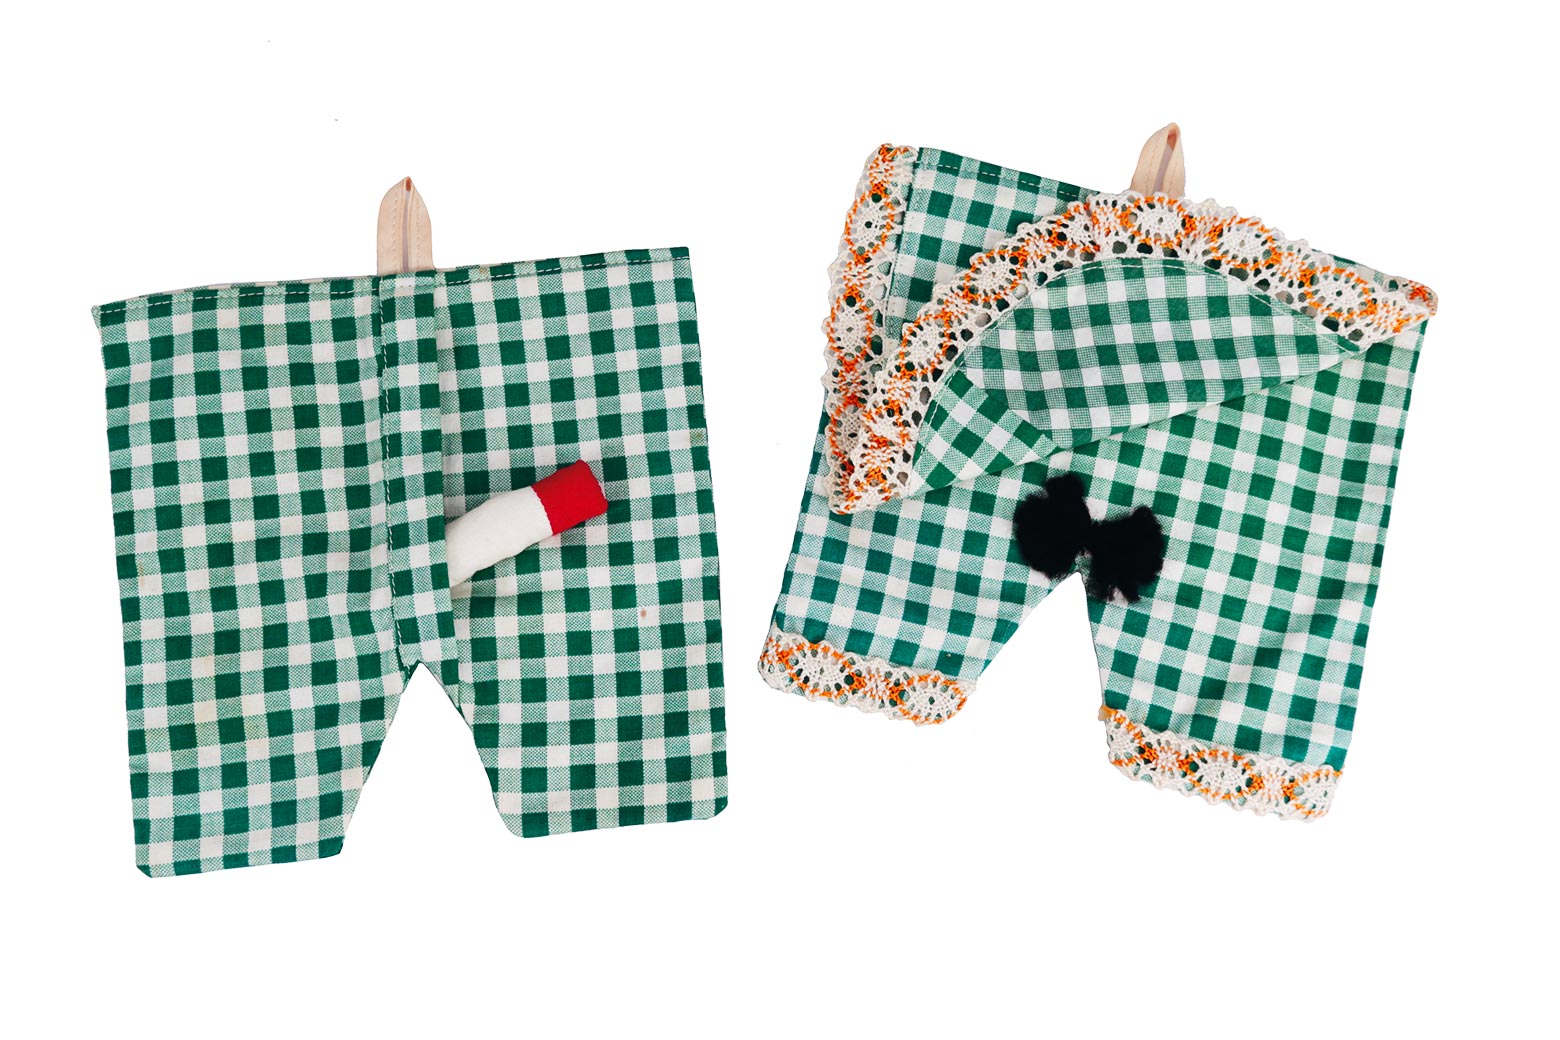 Gingham potholders with attached cloth penises and thatches of pubic hair.